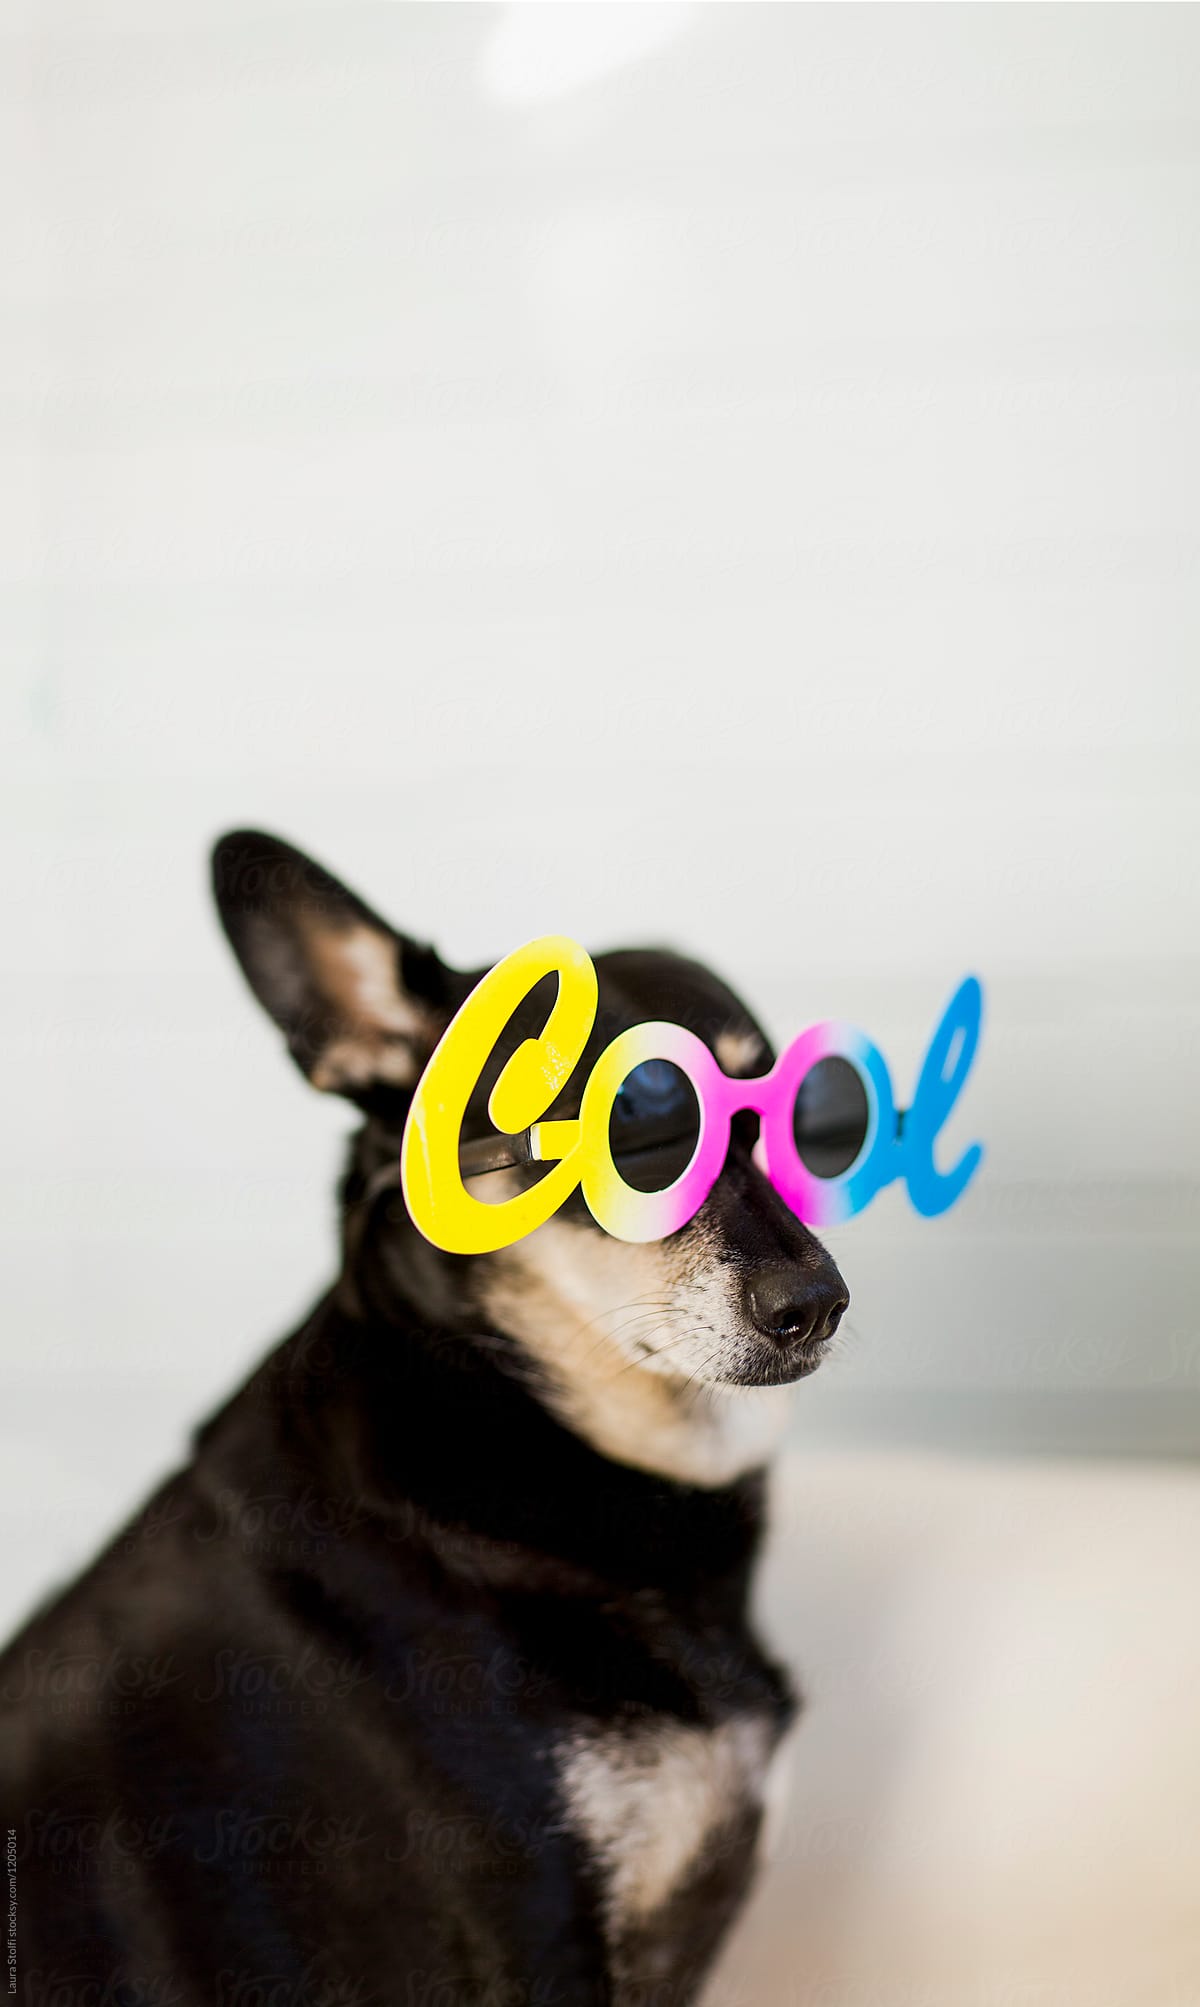 Cool dog wearing silly colorful sunglasses